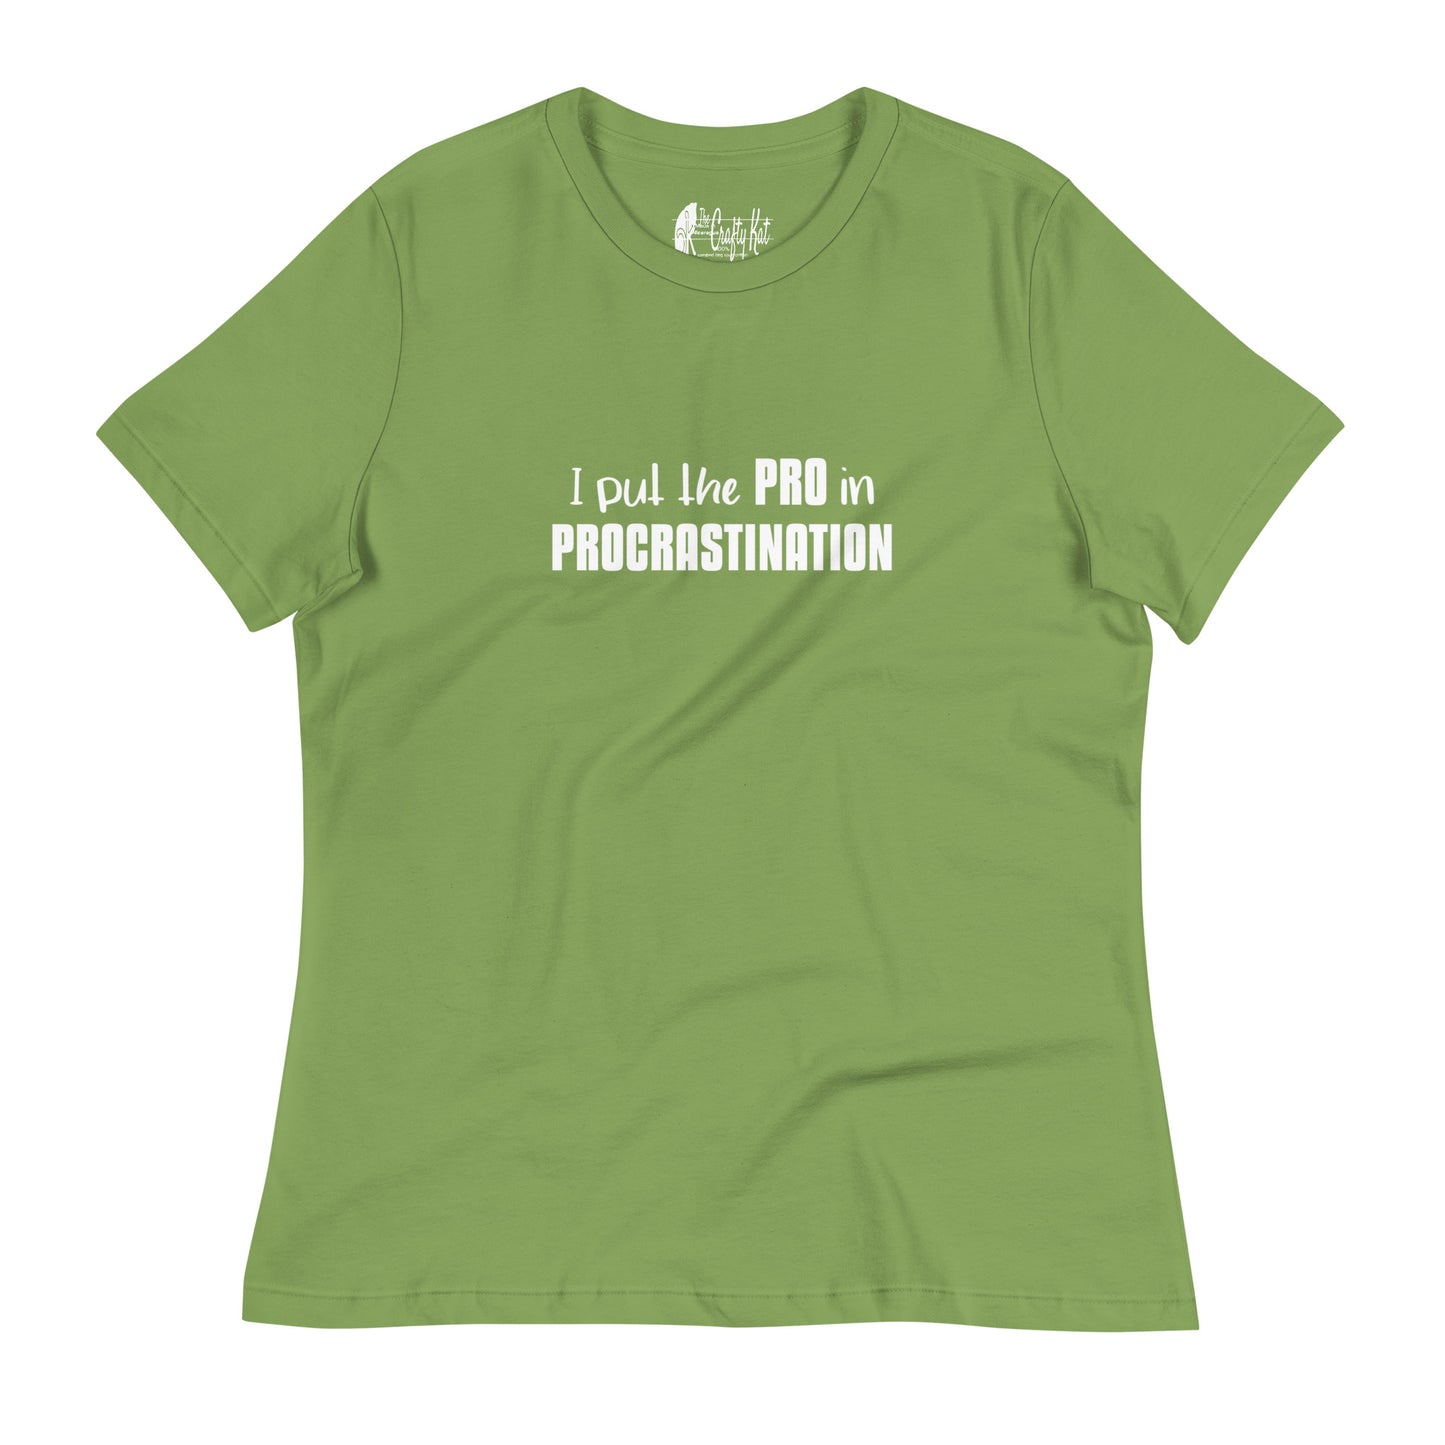 Leaf green women's relaxed t-shirt with text graphic: "I put the PRO in PROCRASTINATION"